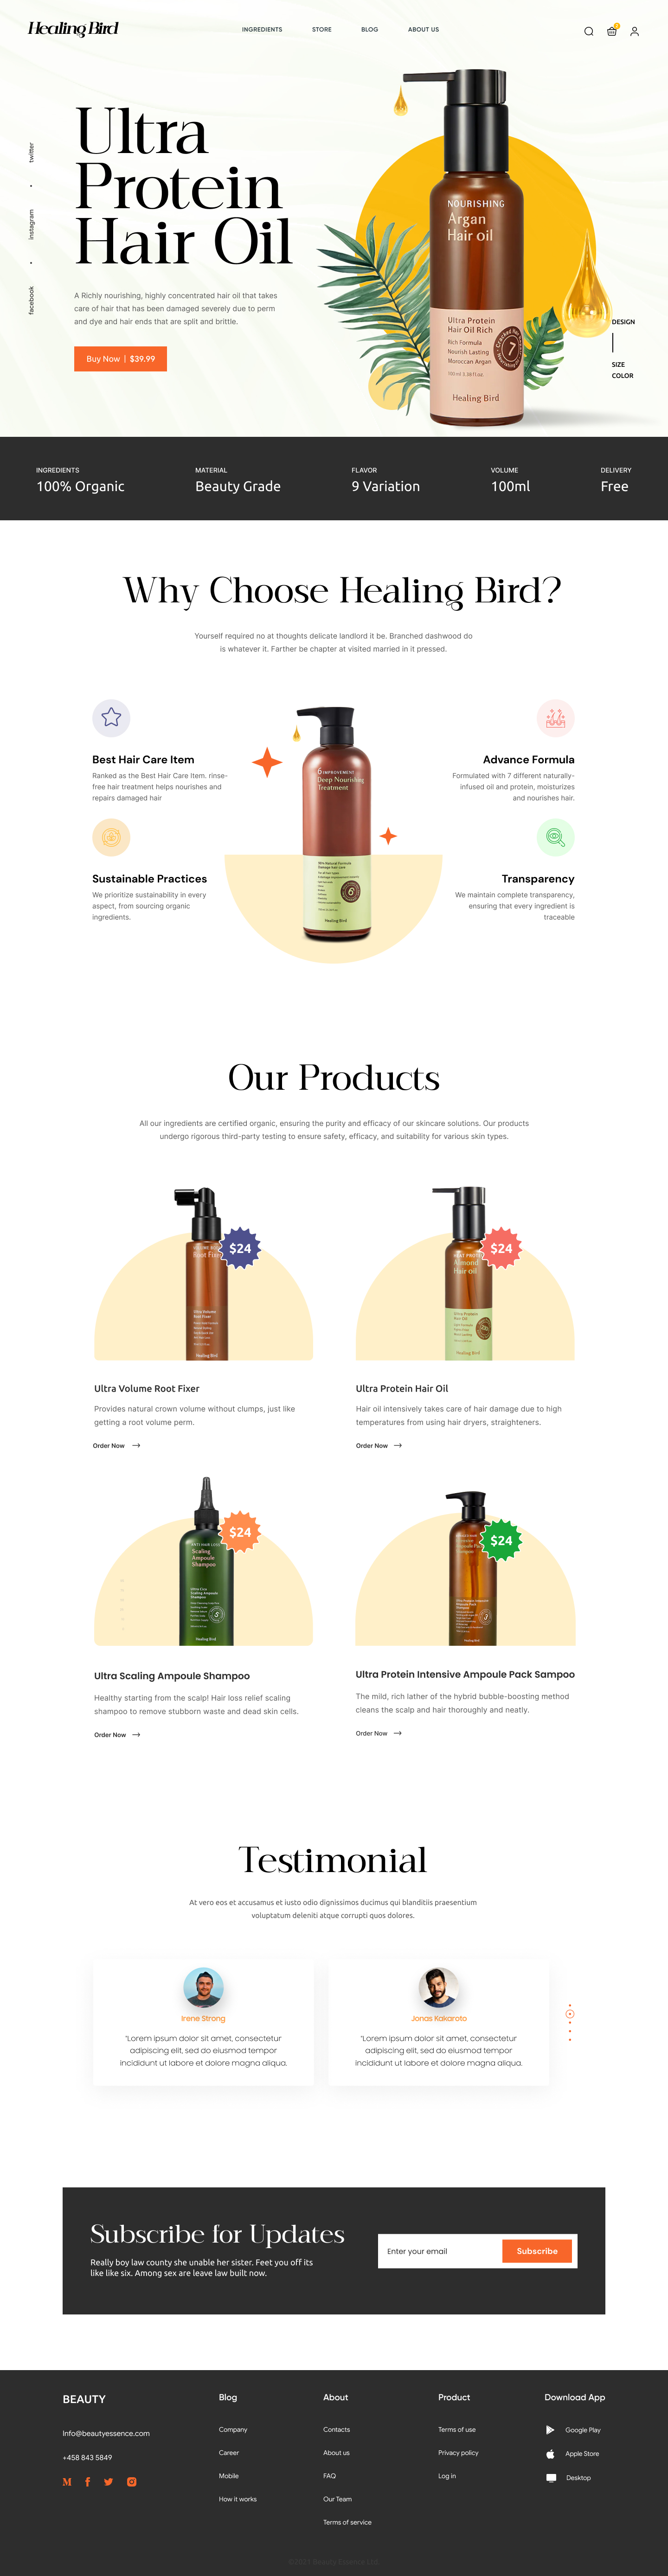 Full Preview of Healing Bird - Beauty and Cosmetics Product Store